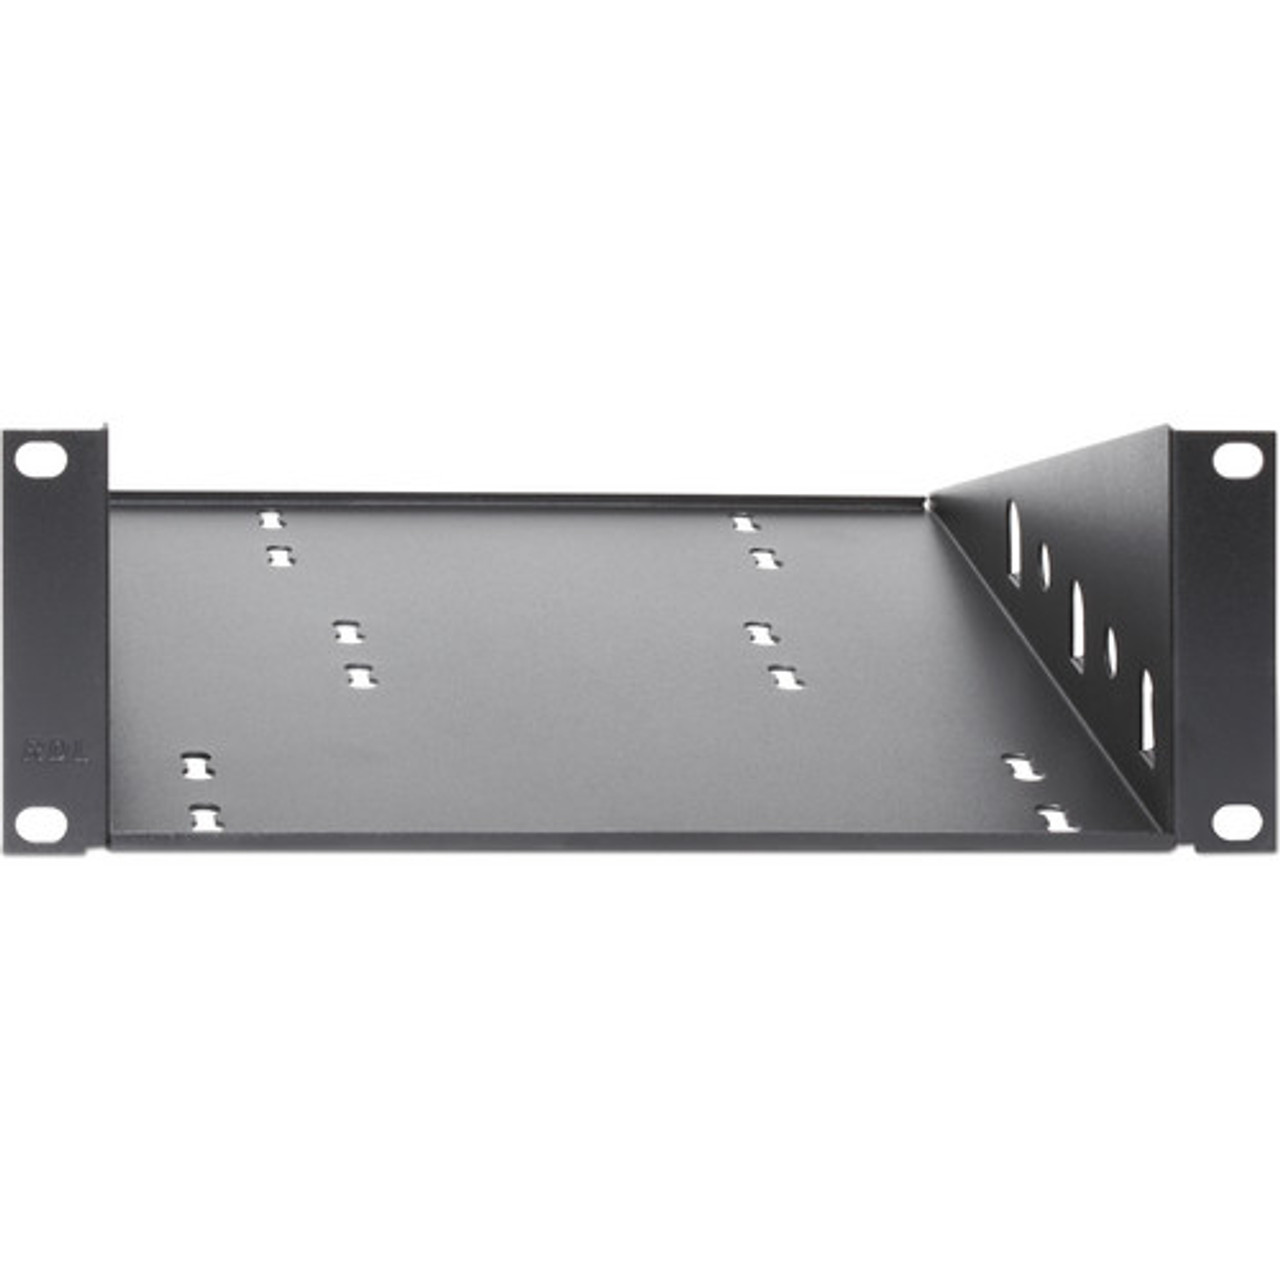 RDL HD-HRA1 Rack Mount for 1 HD Series Product (HD-HRA1)